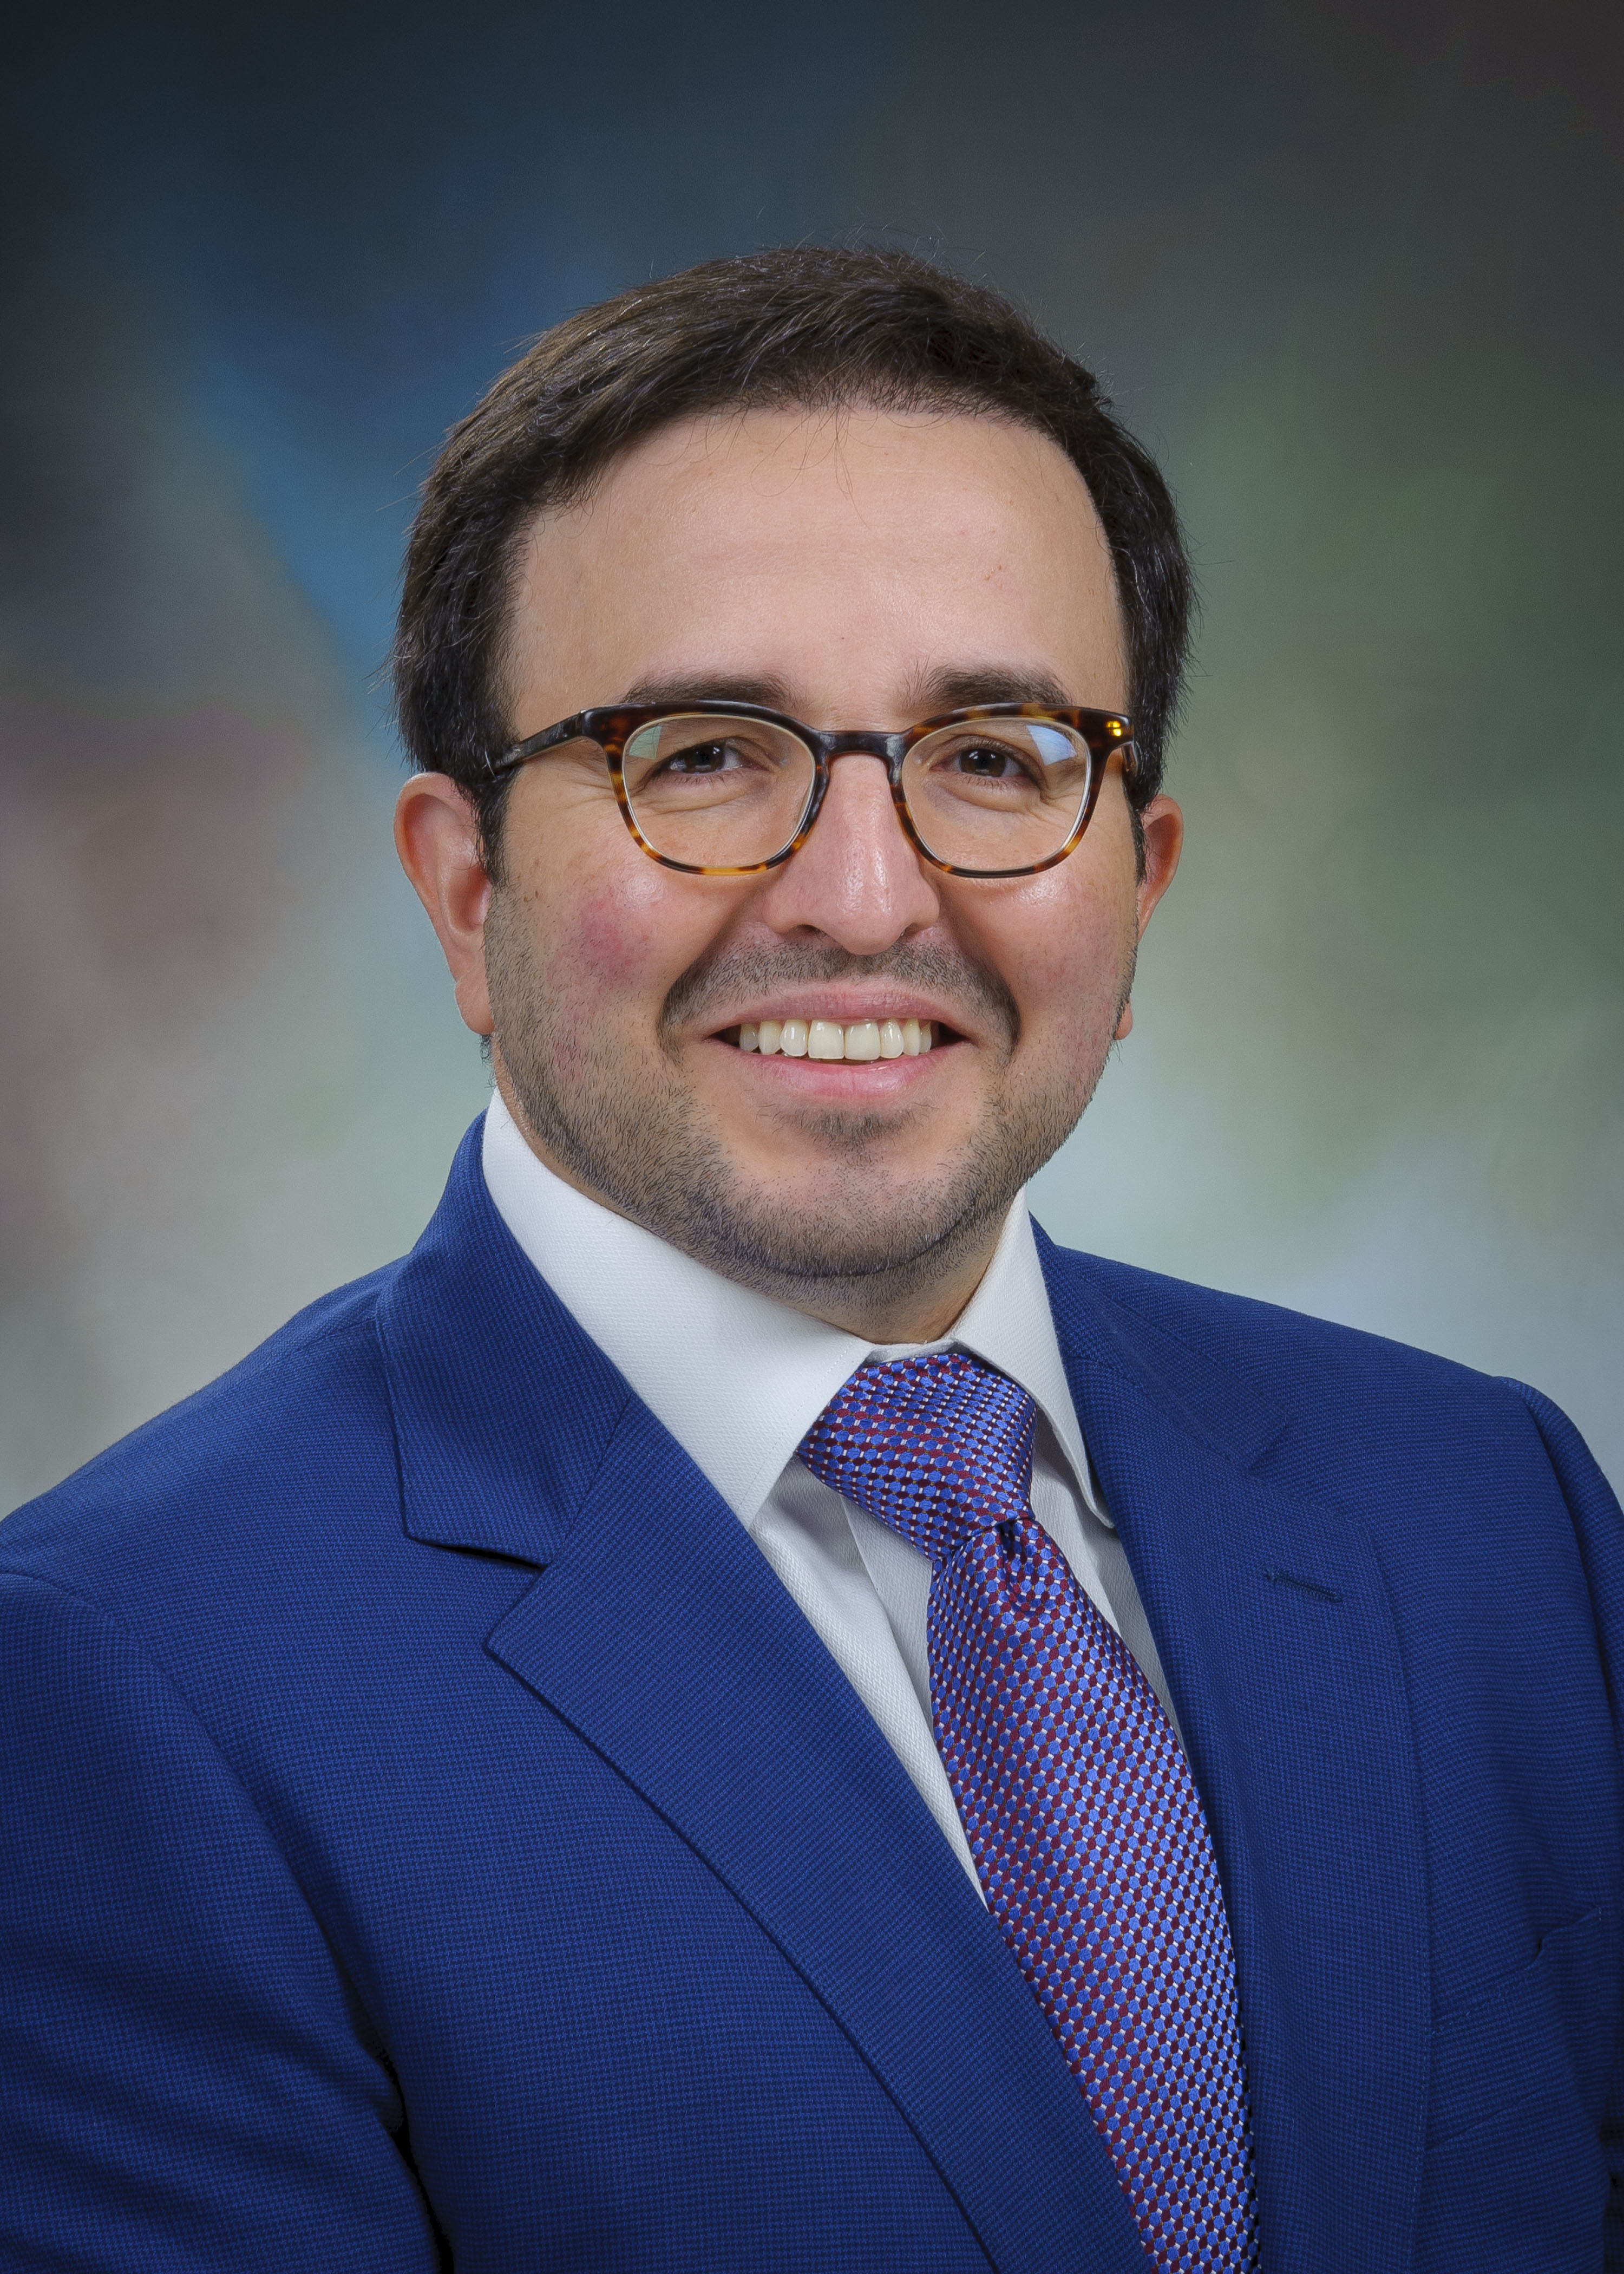 headshot image of male physician wearing a blue blazer, glasses and a tie